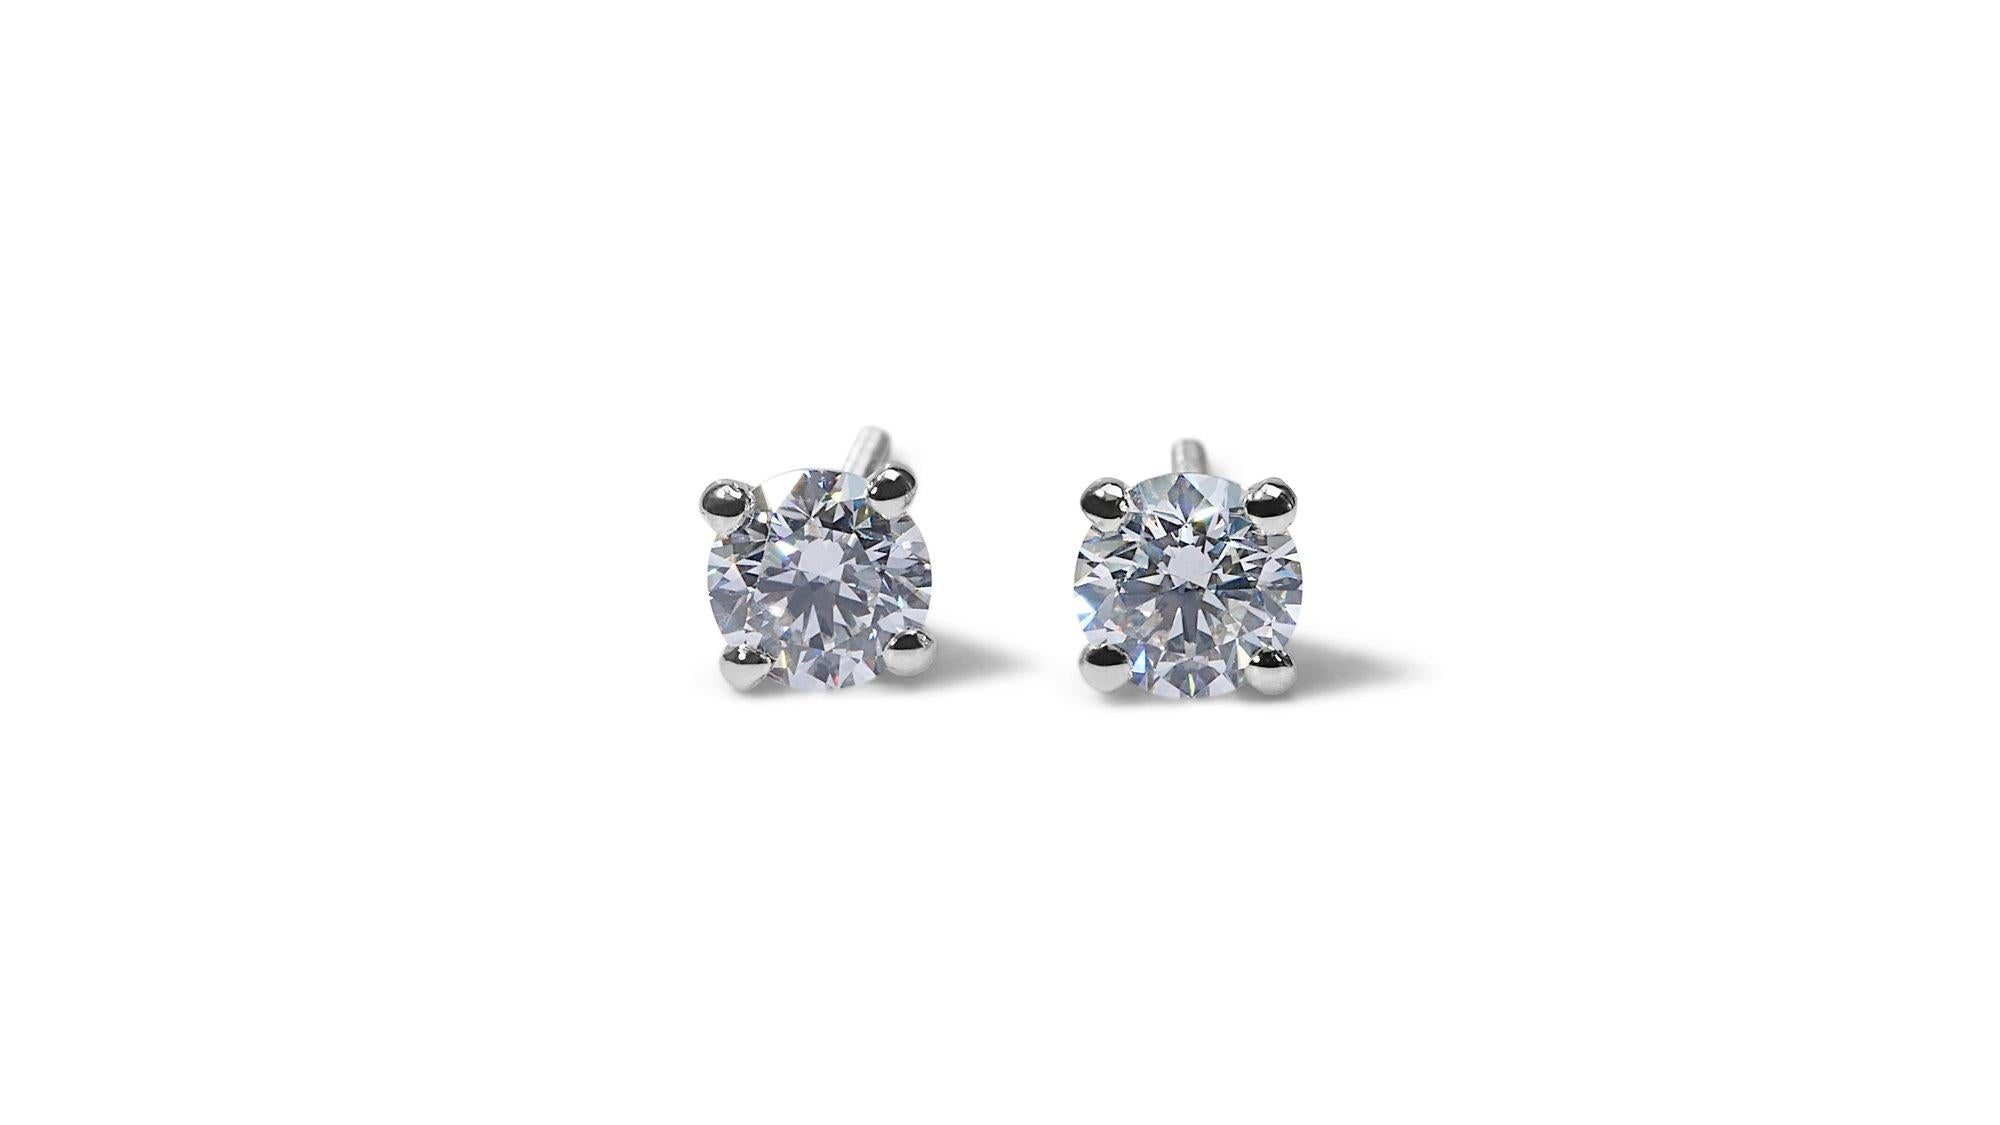 Gorgeous pair of Earrings with dazzling 0.8 carat round brilliant diamonds. The jewelry is made of 18K White Gold with a high-quality polish. It comes with a GIA certificate and a fancy jewelry box.

2 diamonds main stone of 0.8 carat
cut: round